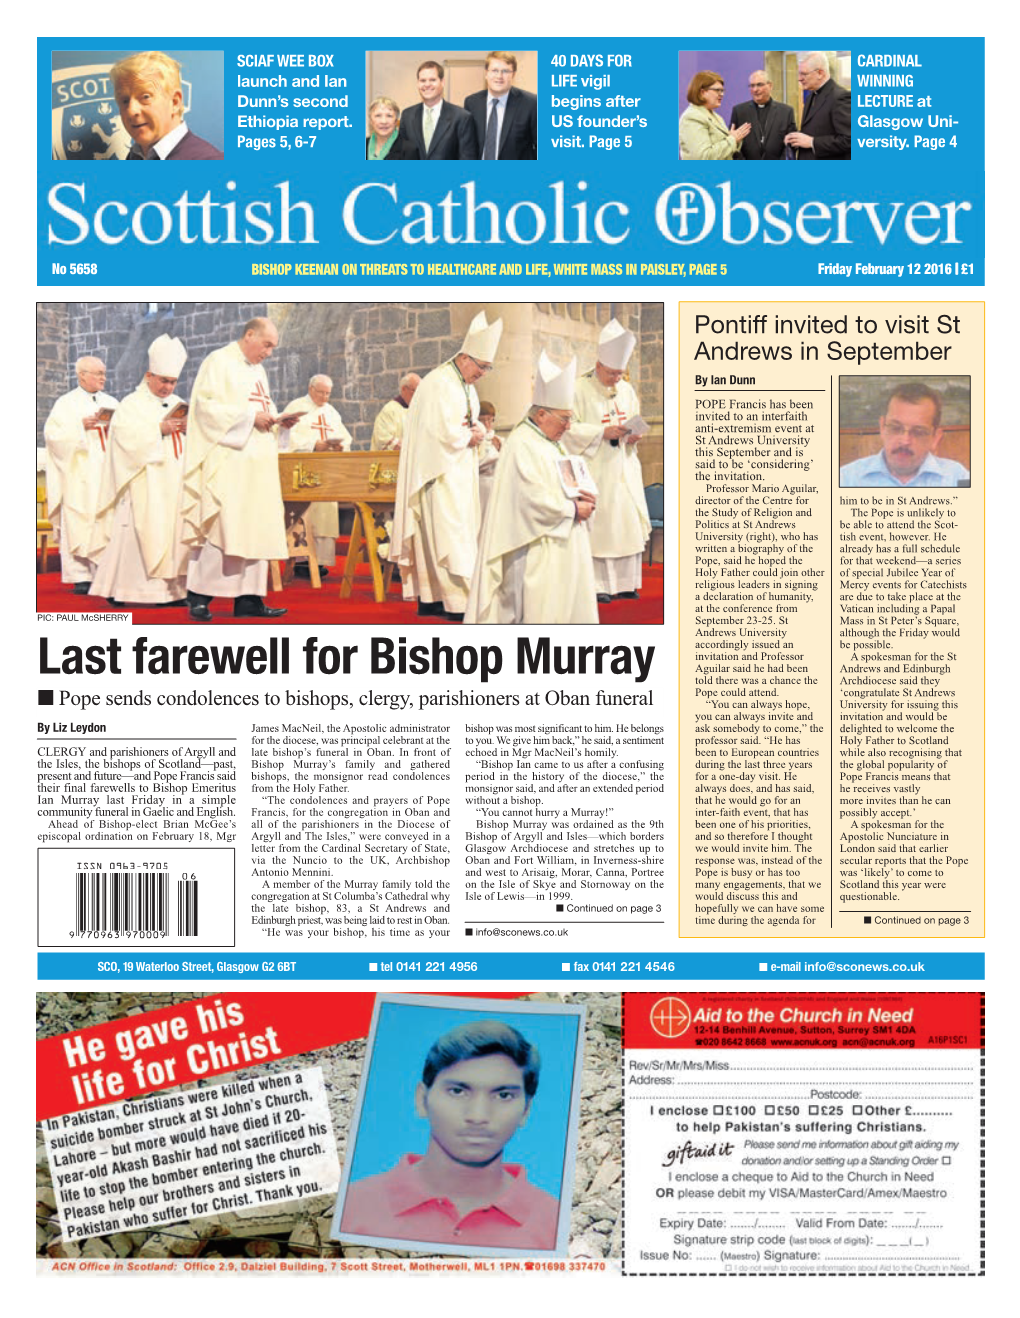 Last Farewell for Bishop Murray Aguilar Said He Had Been Andrews and Edinburgh Told There Was a Chance the Archdiocese Said They Pope Could Attend